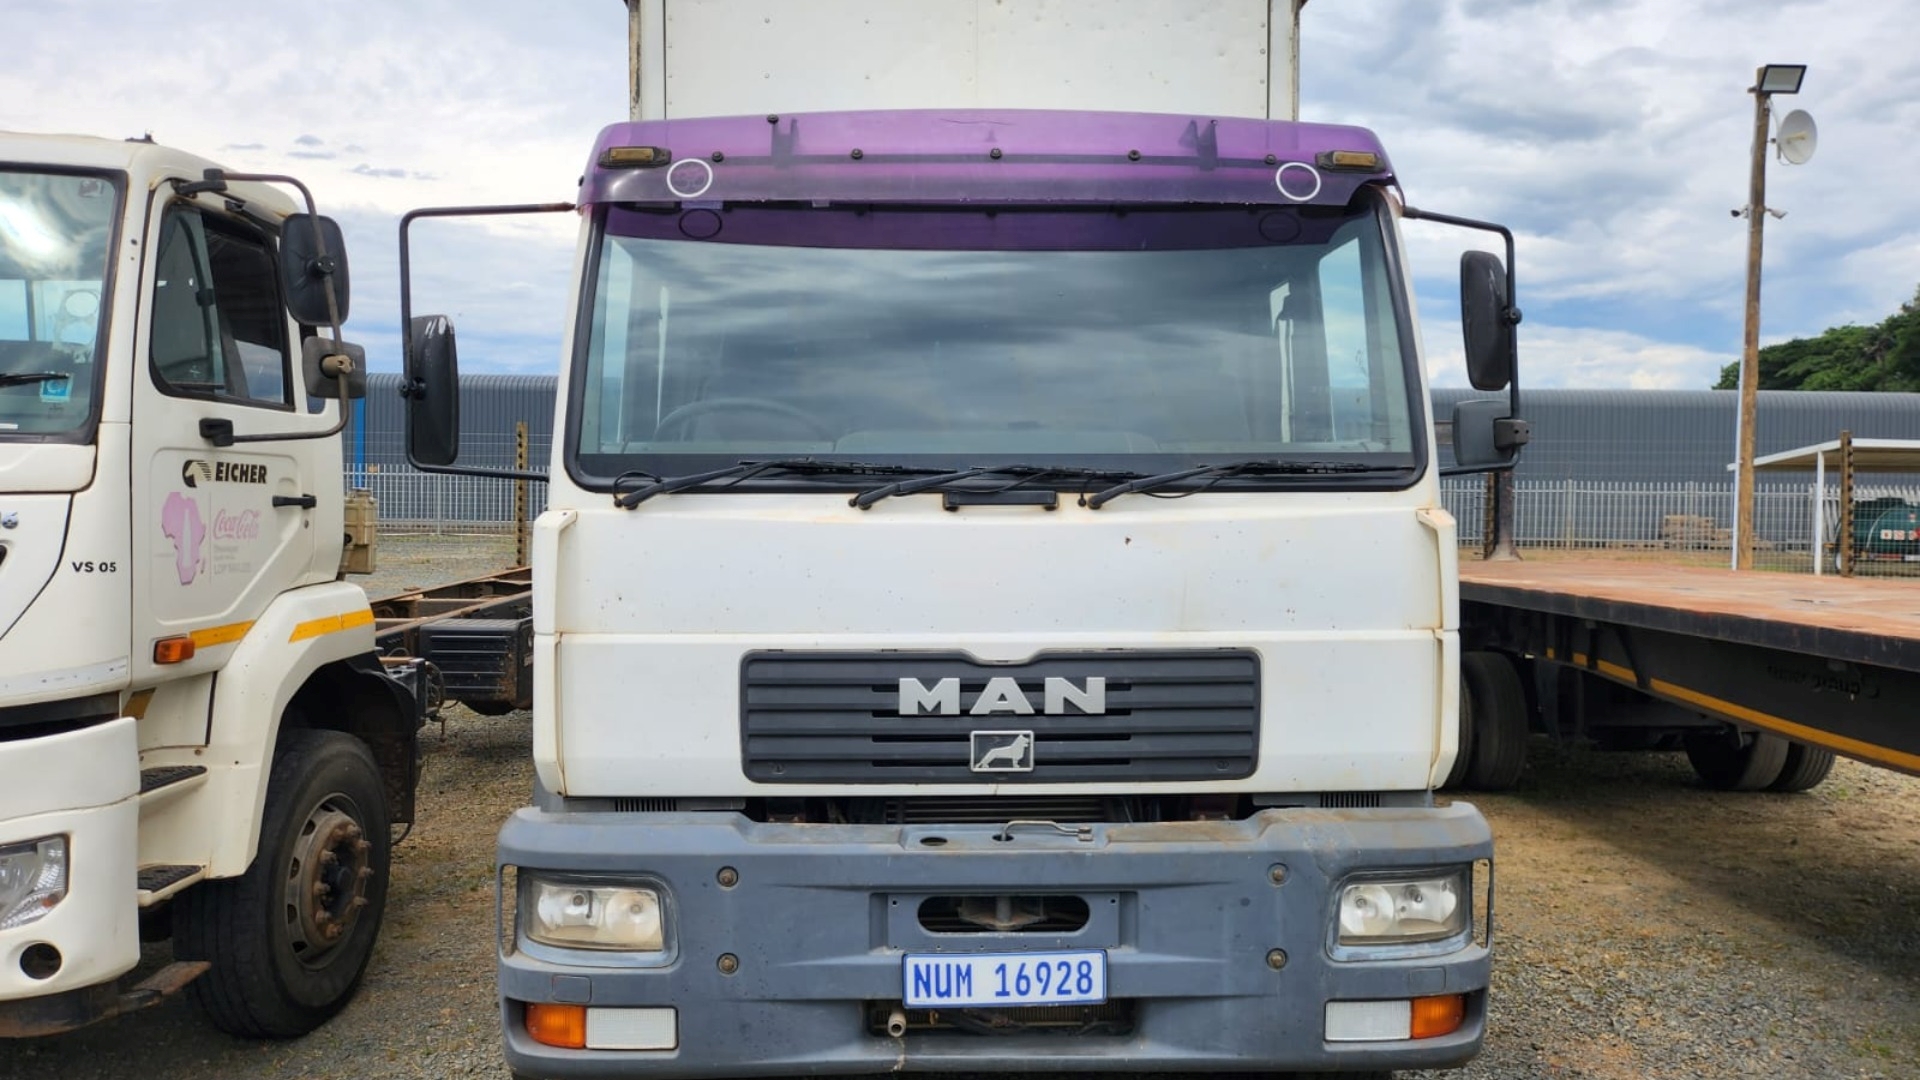 MAN Curtain side trucks MAN LE18 284, 8 Ton Tautliner 2003 for sale by Truck Logistic | Truck & Trailer Marketplace